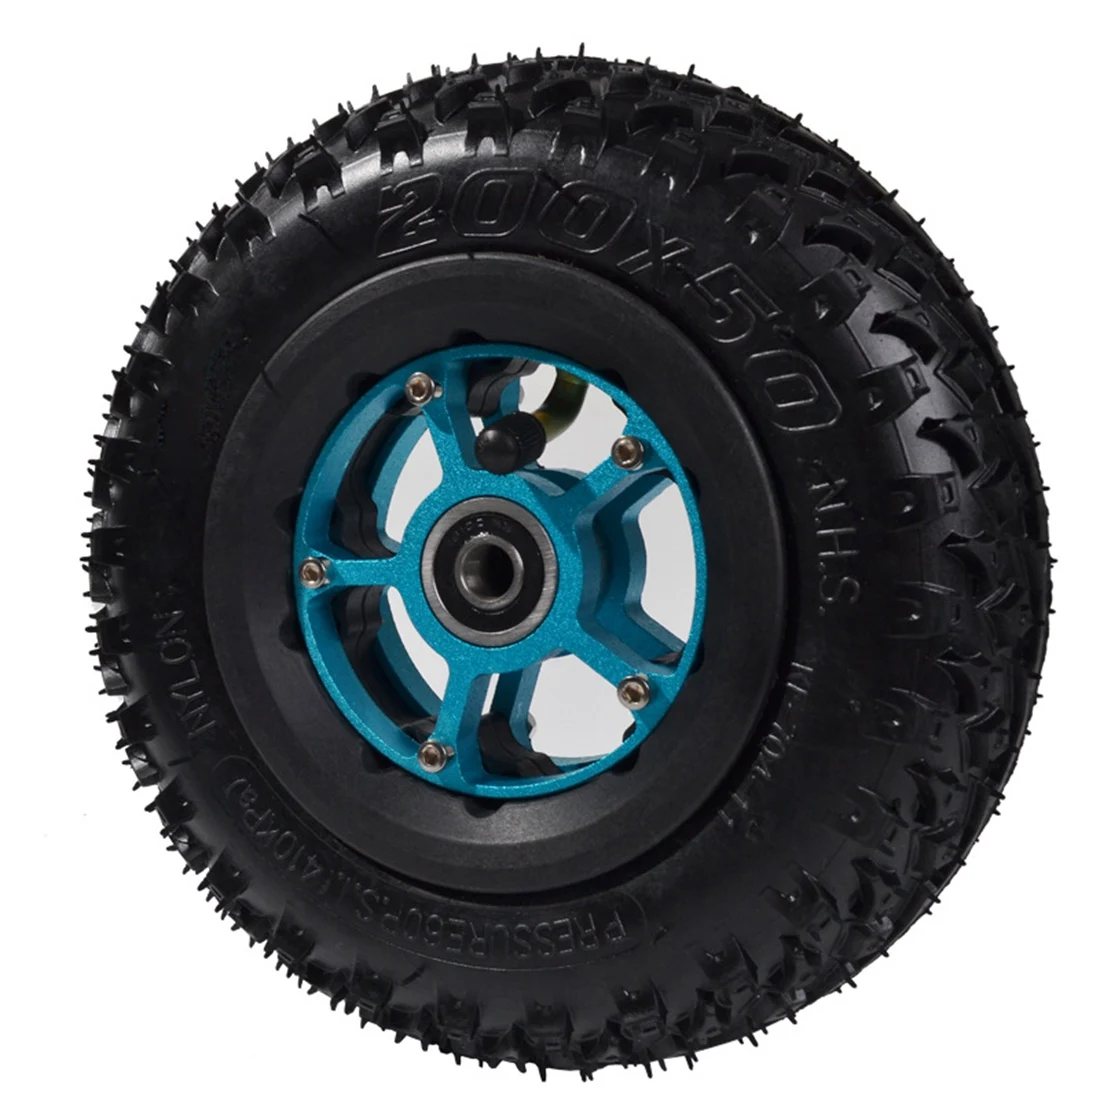 

8 Inch 200X50 Pneumatic Tires for Electric Skateboard Damping Cross Country Skateboard Tubeless Tyre Parts Front Wheel